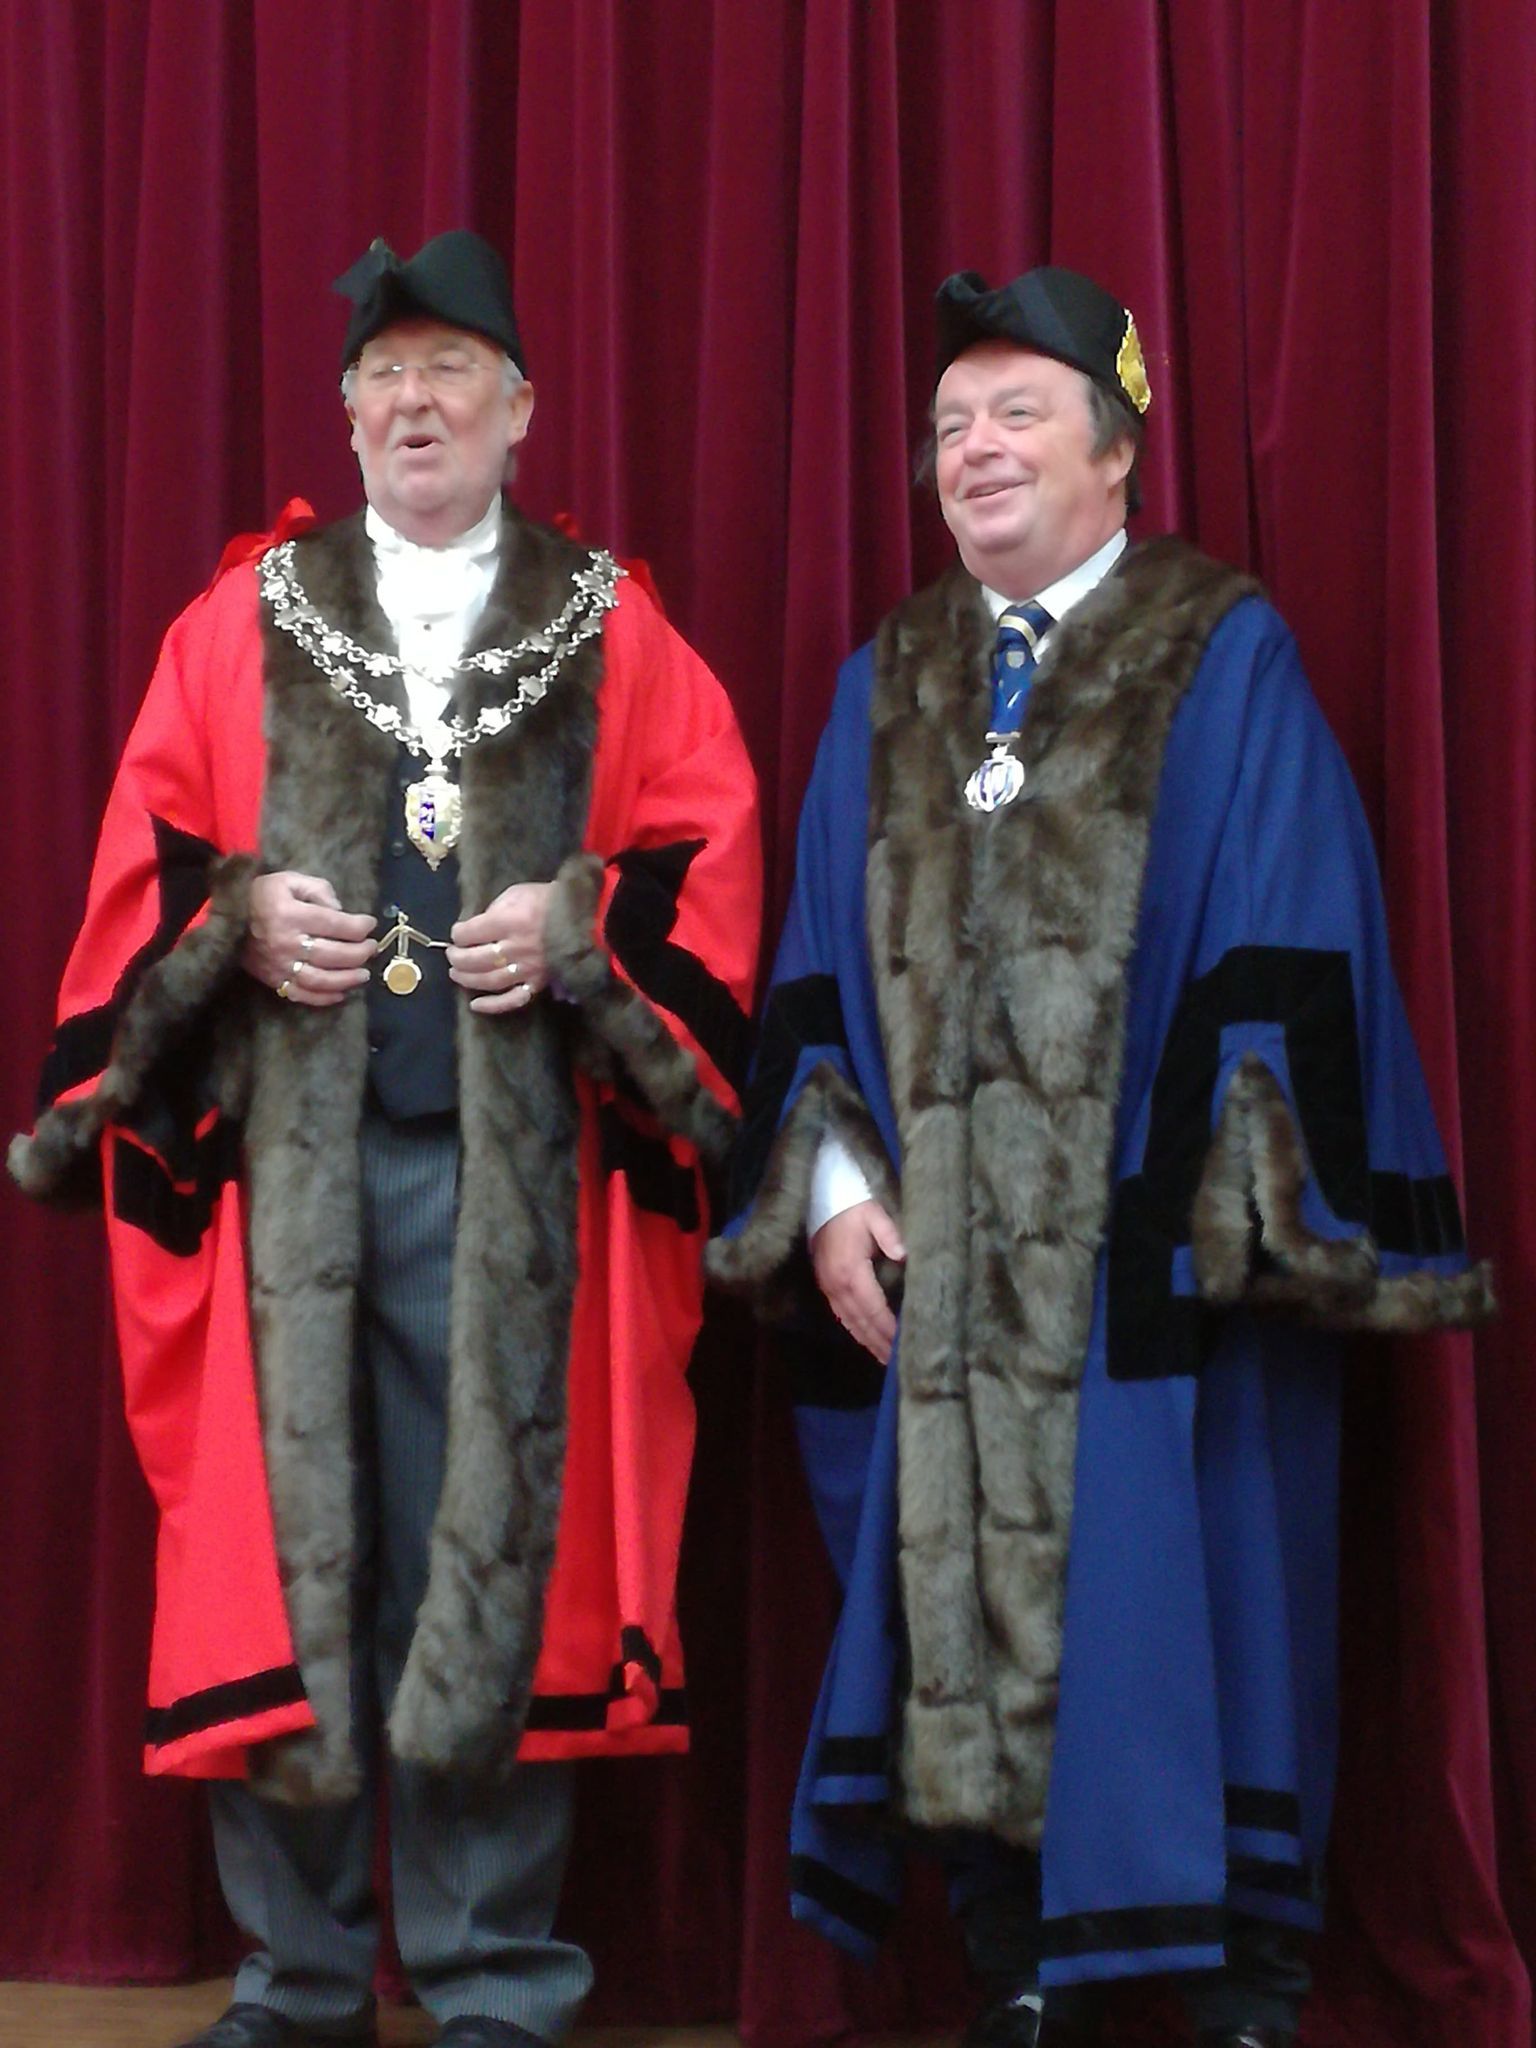 cHAINS OF OFFICE: New Maldon mayorr David Ogg and deputy Andrew Lay in their regalia